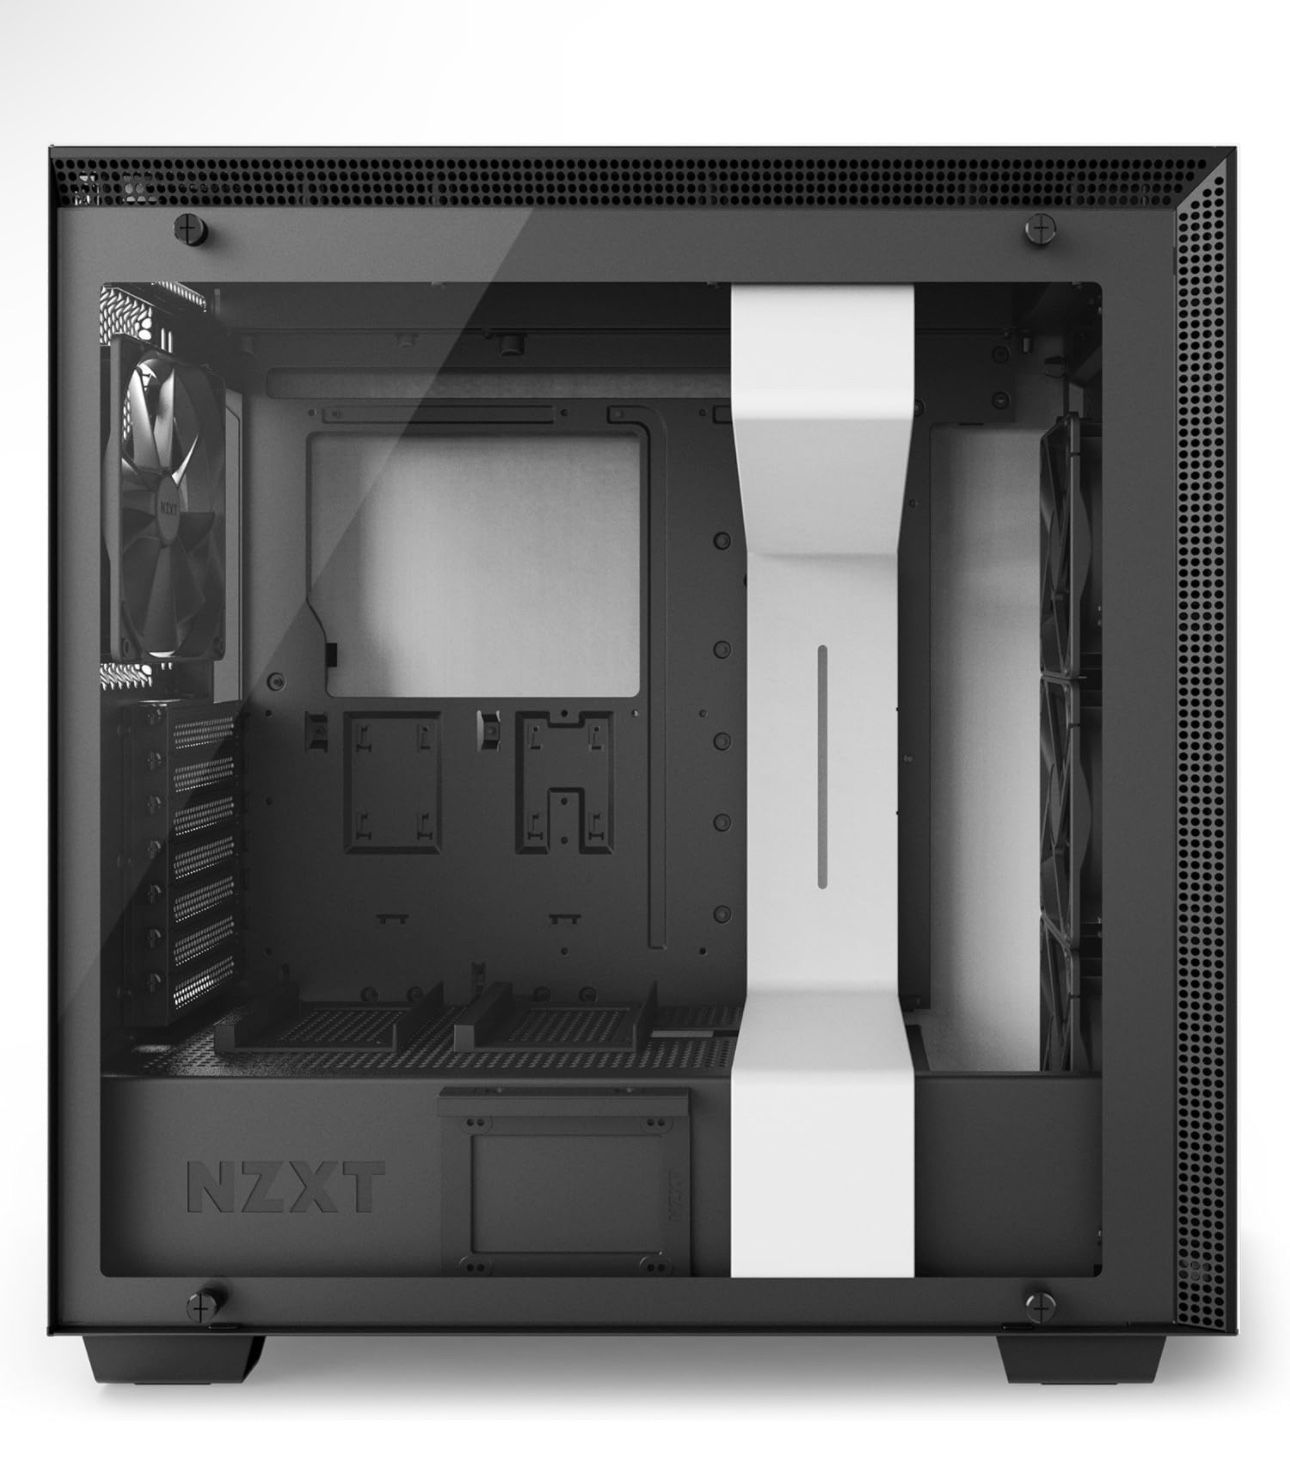 NZXT H700i - ATX Mid-Tower PC Gaming Case - CAM-Powered Smart Device - RGB and Fan Control - Enhanced Cable Management System – Water-Cooling Ready